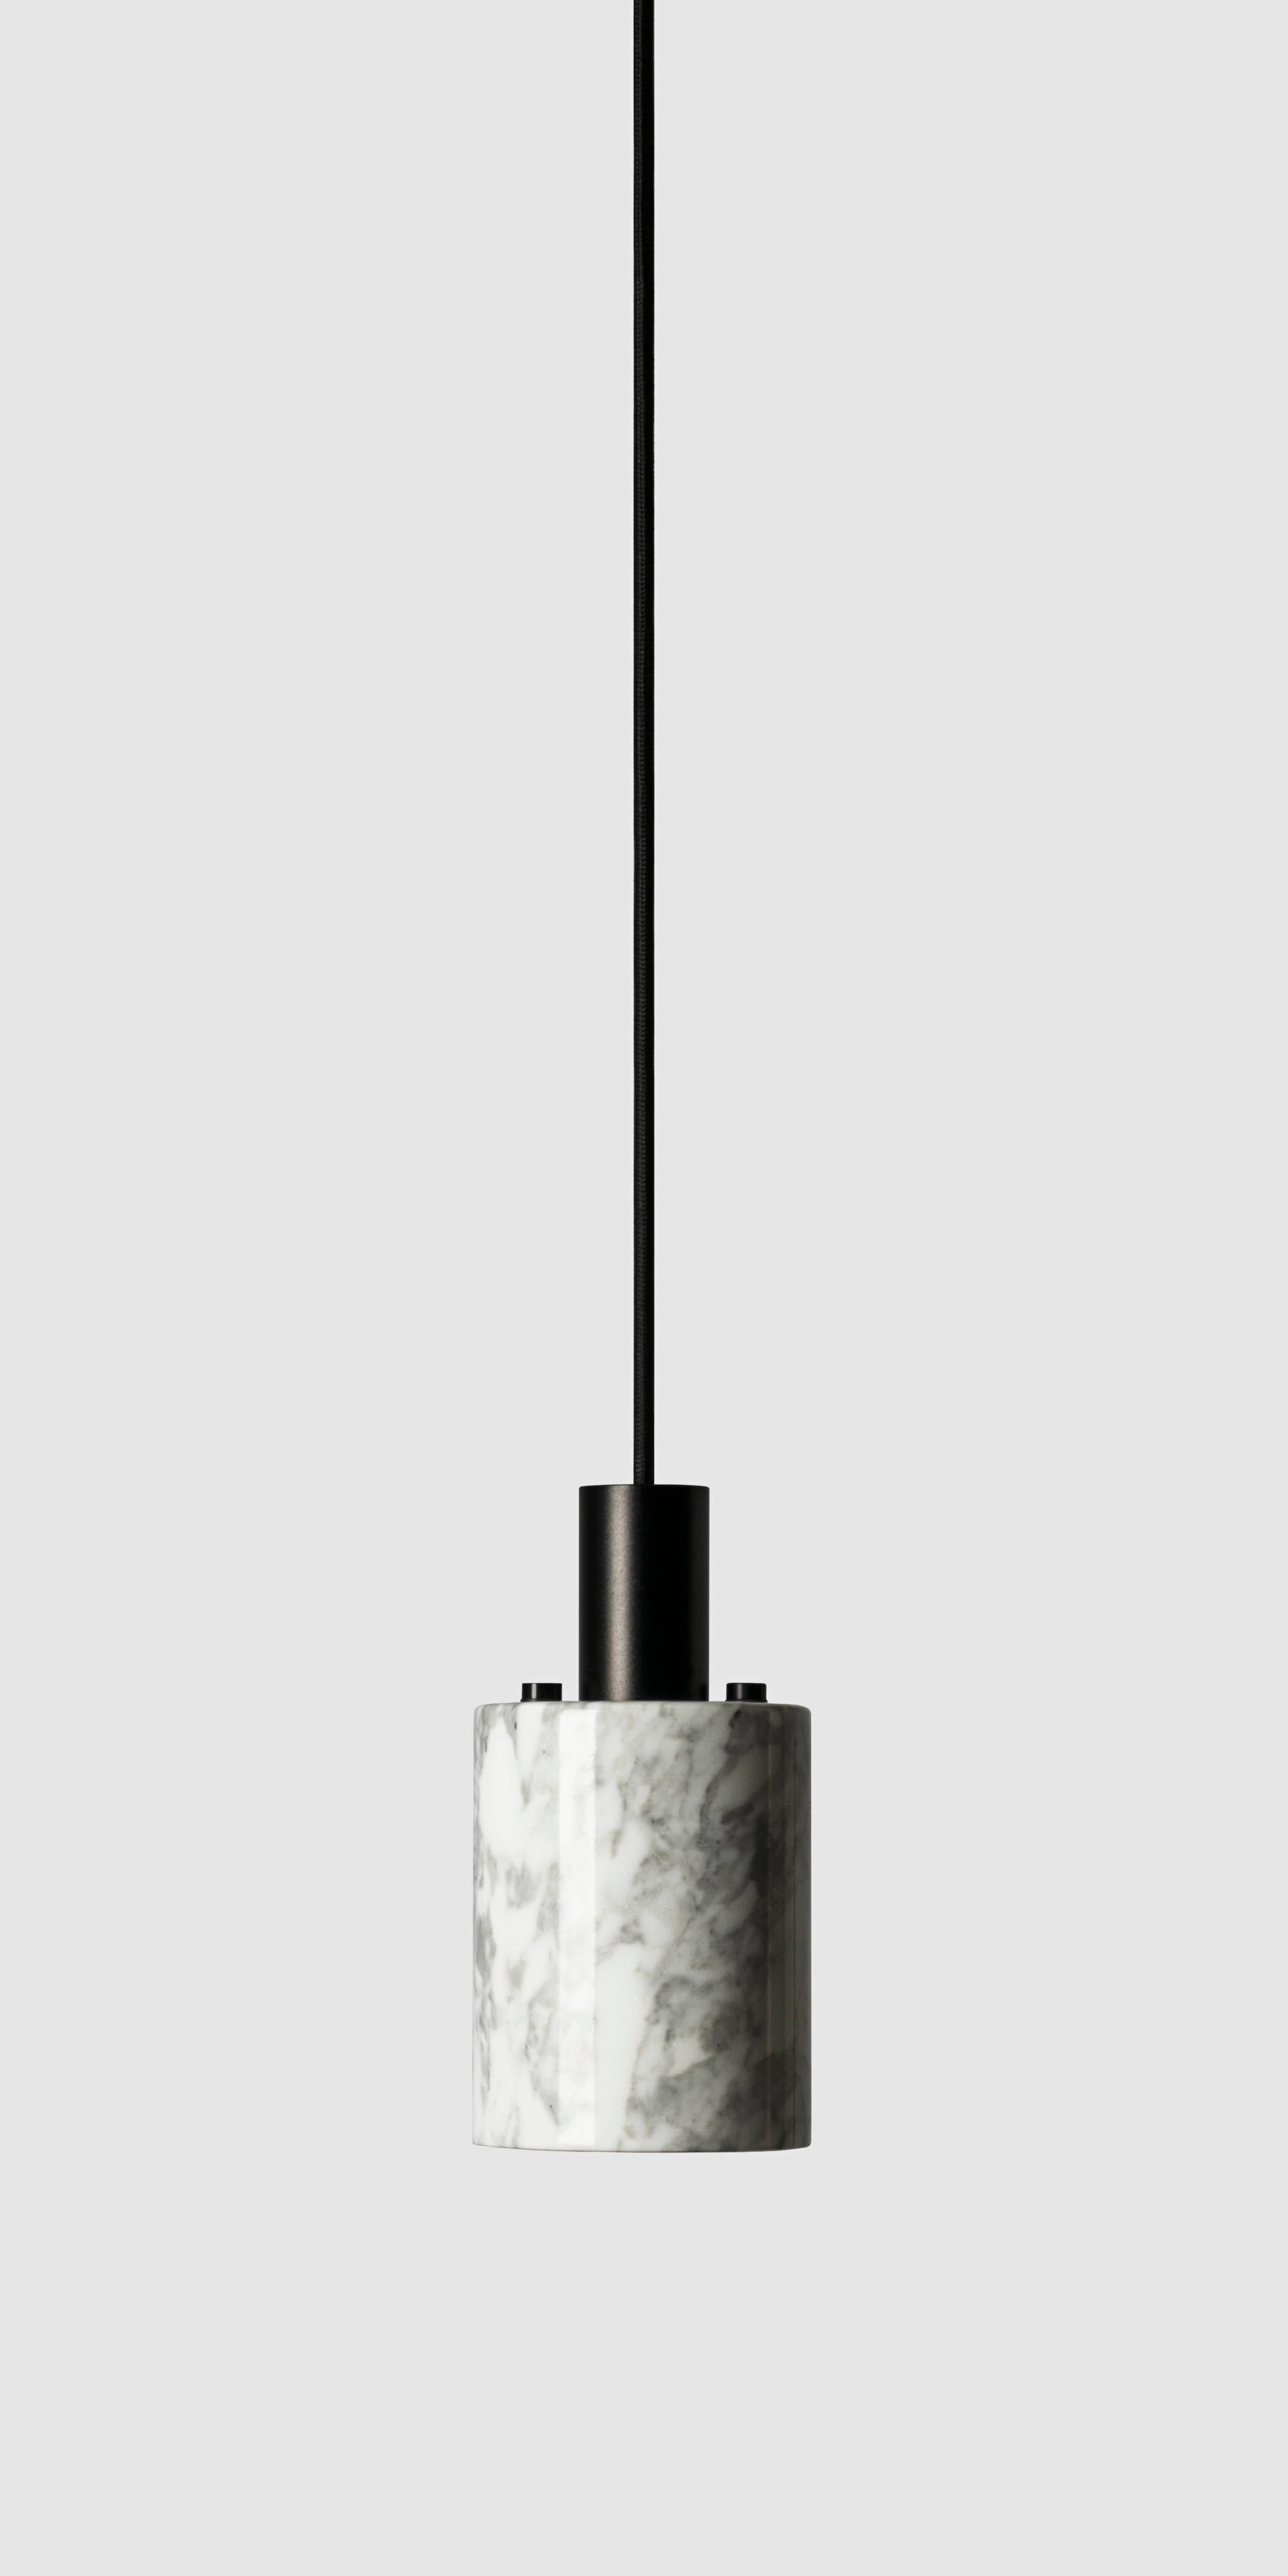 Pendant lamps 'N' by Buzao x Bentu design.

Black lava stone or white marble
Black (aluminium or gold (brass) finish

(Sold individually)

19.5 cm high, 10 cm diameter
Wire: 2 meters black (adjustable) 

Lamp type: E27 LED 3W 100-240V 80Ra 200LM